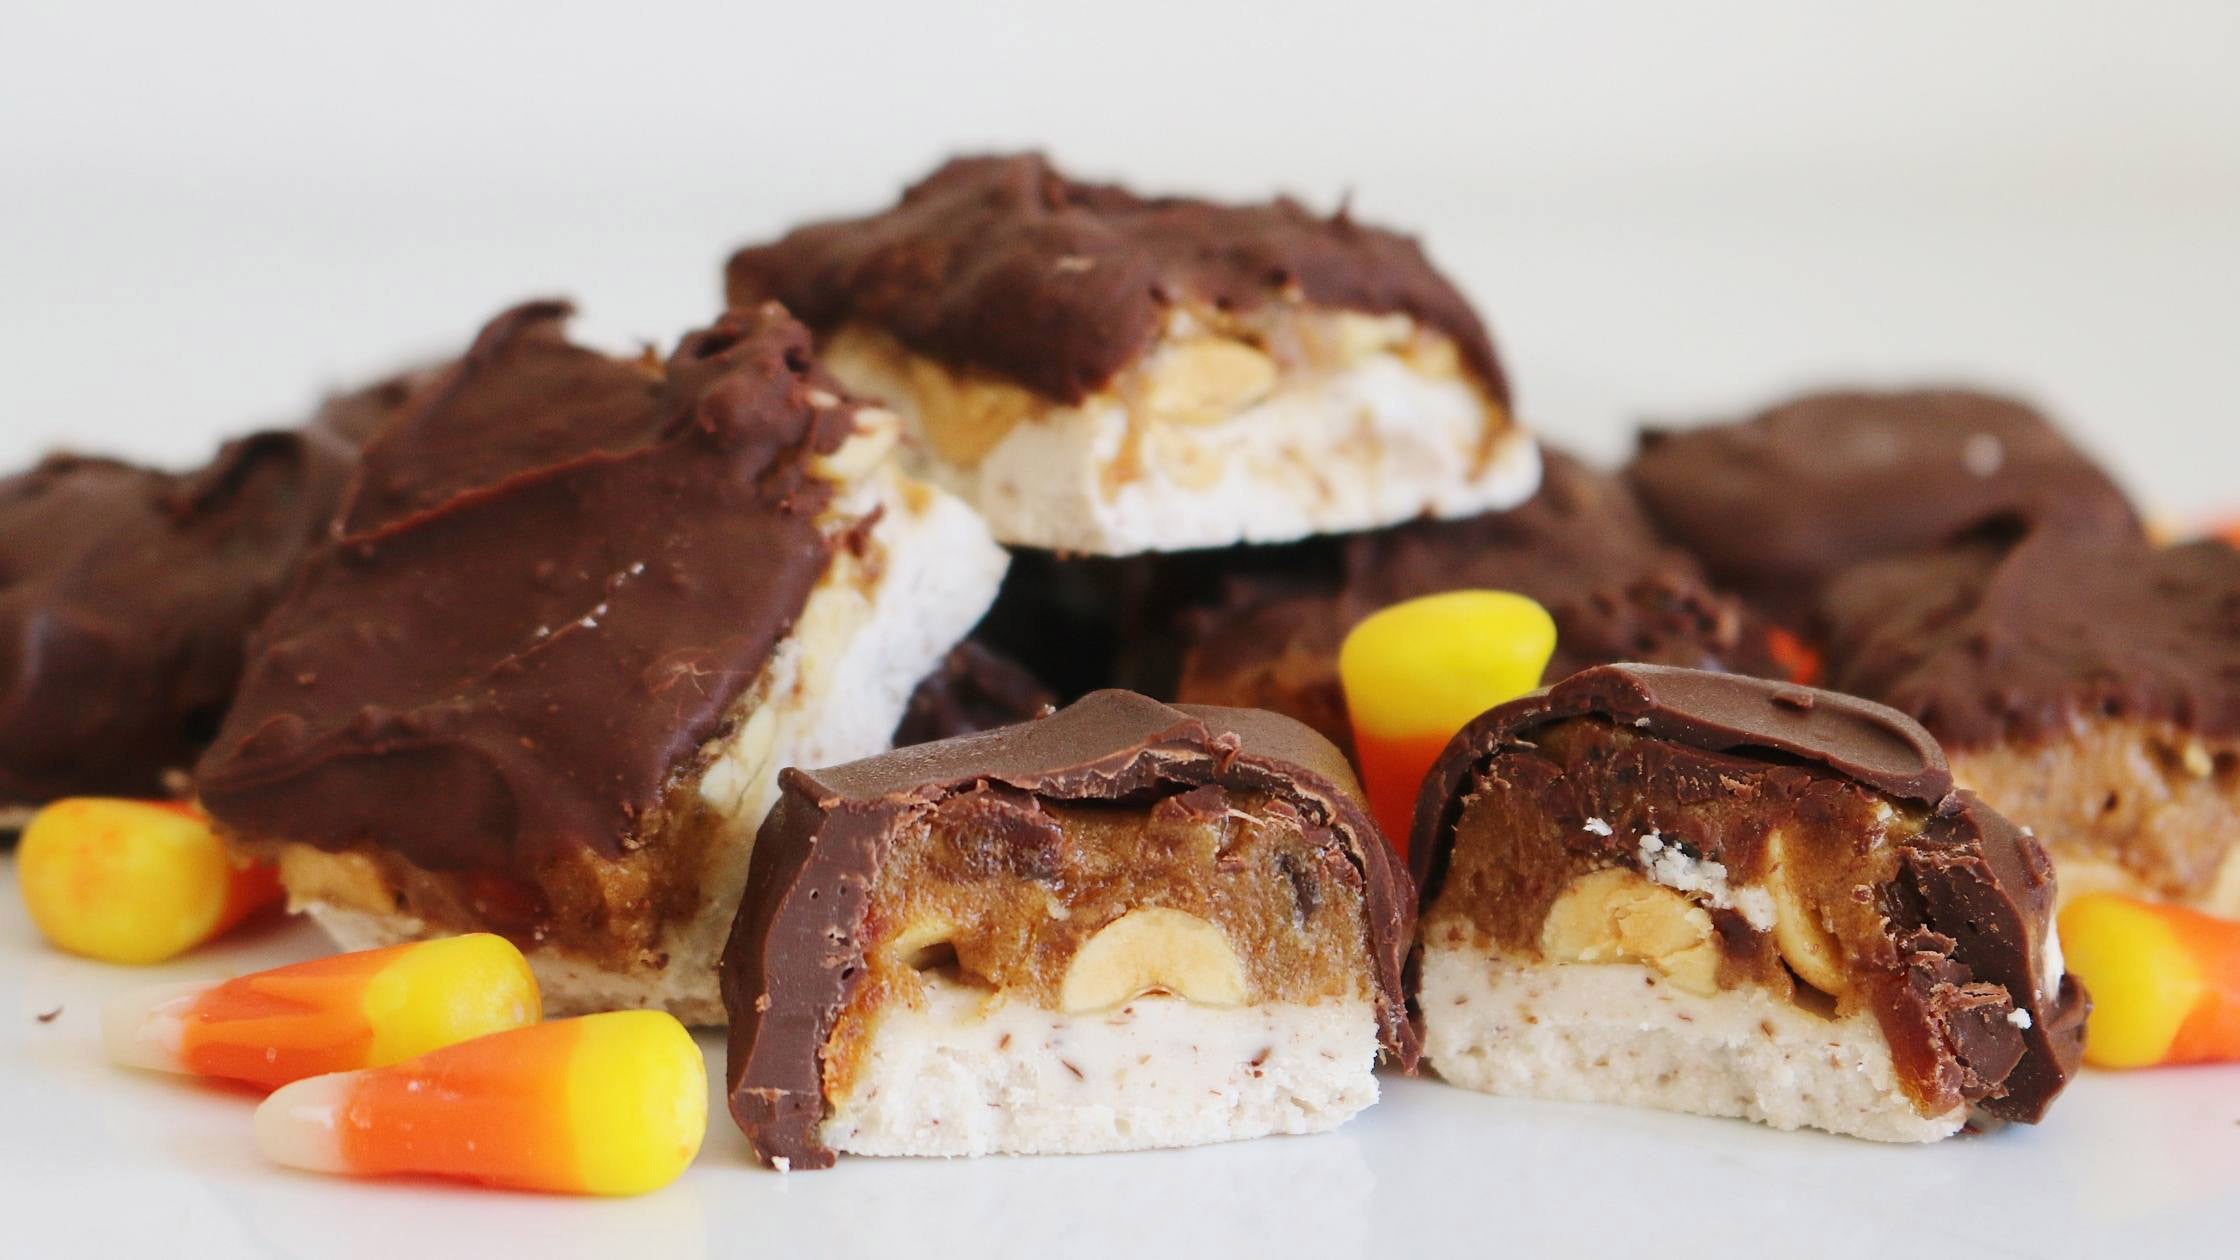 Homemade snickers bars with candy corn